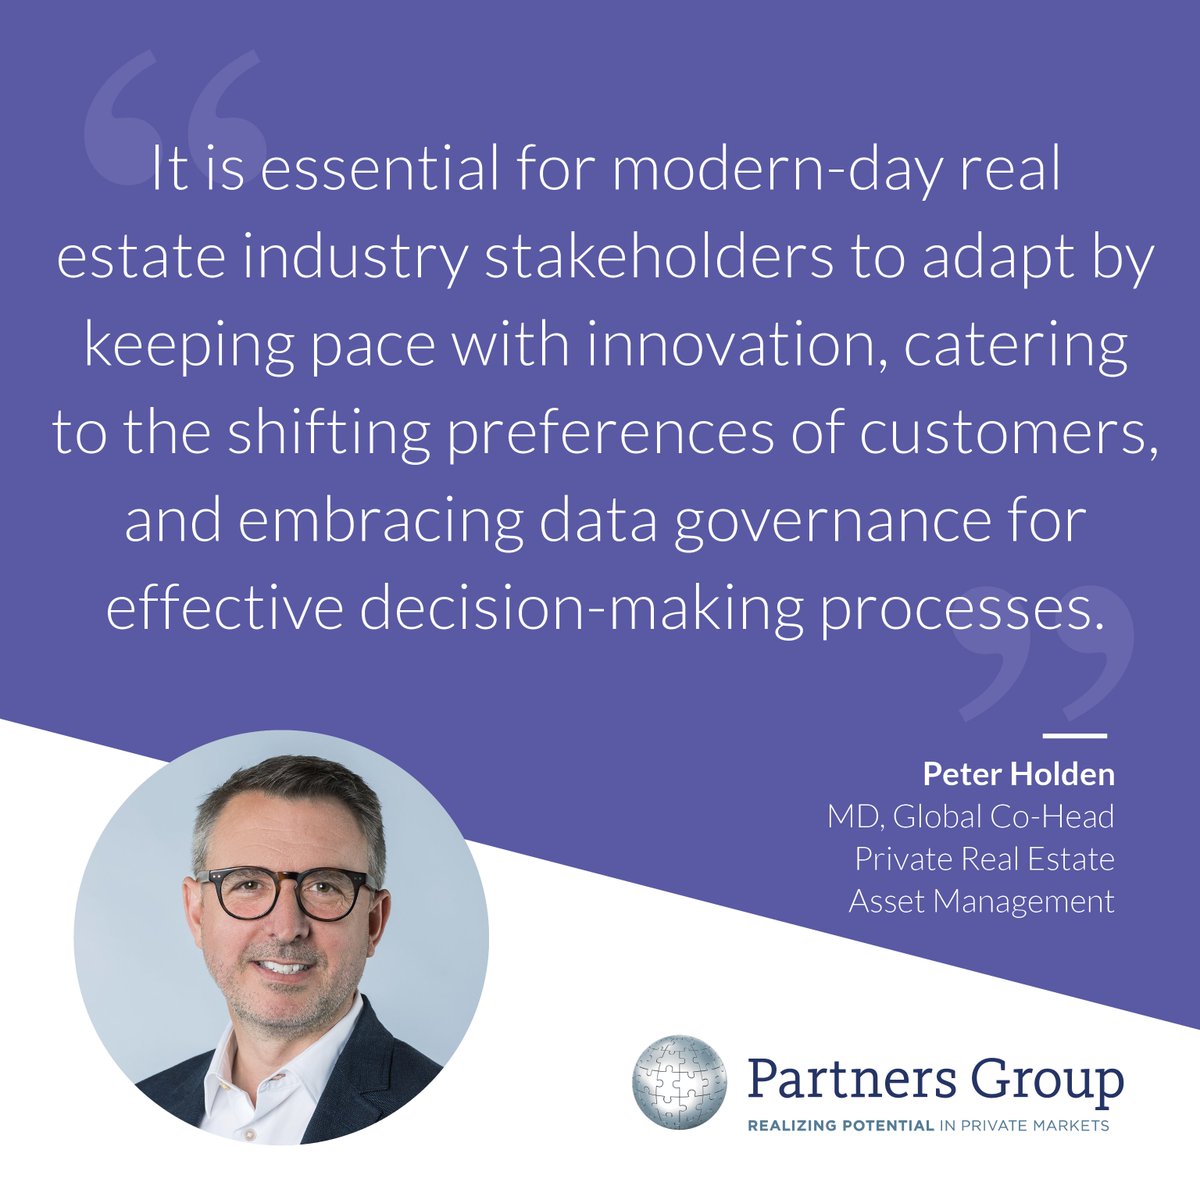 Proptech and #AI solutions have a role to play in driving #decarbonization, economic viability, and long-term success in a rapidly changing #realestate landscape, Partners Group's Peter Holden writes in a guest article for @PEREonline. Read it here: partnersgroup.com/en/news-views/…